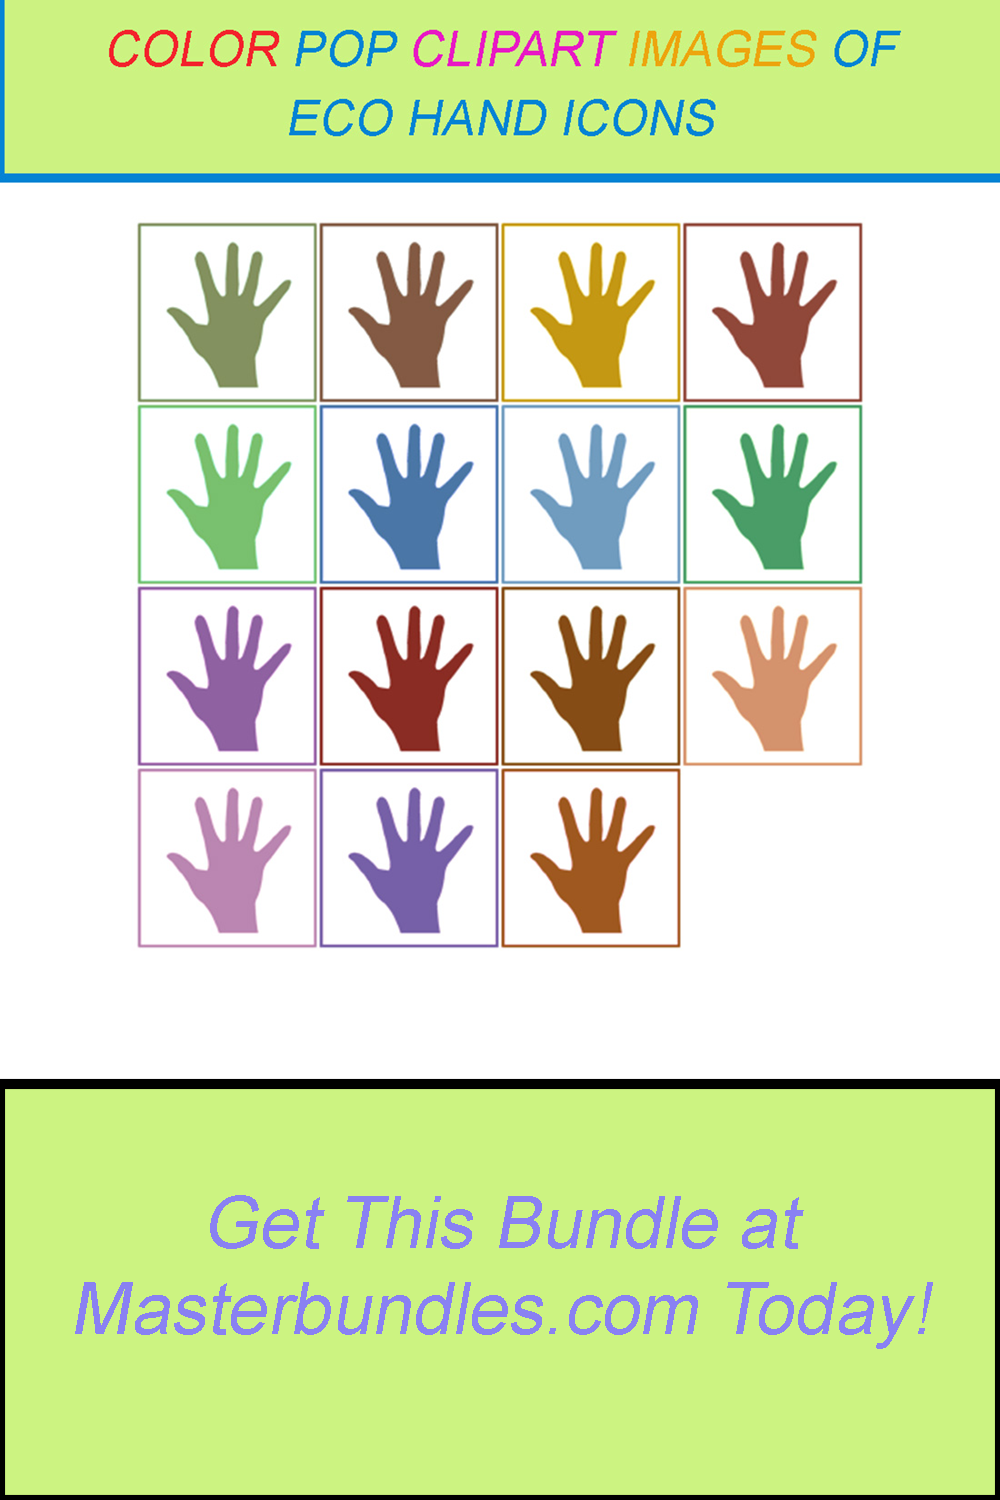 15 COLOR POP CLIPART IMAGES OF ECO HAND ICONS pinterest preview image.